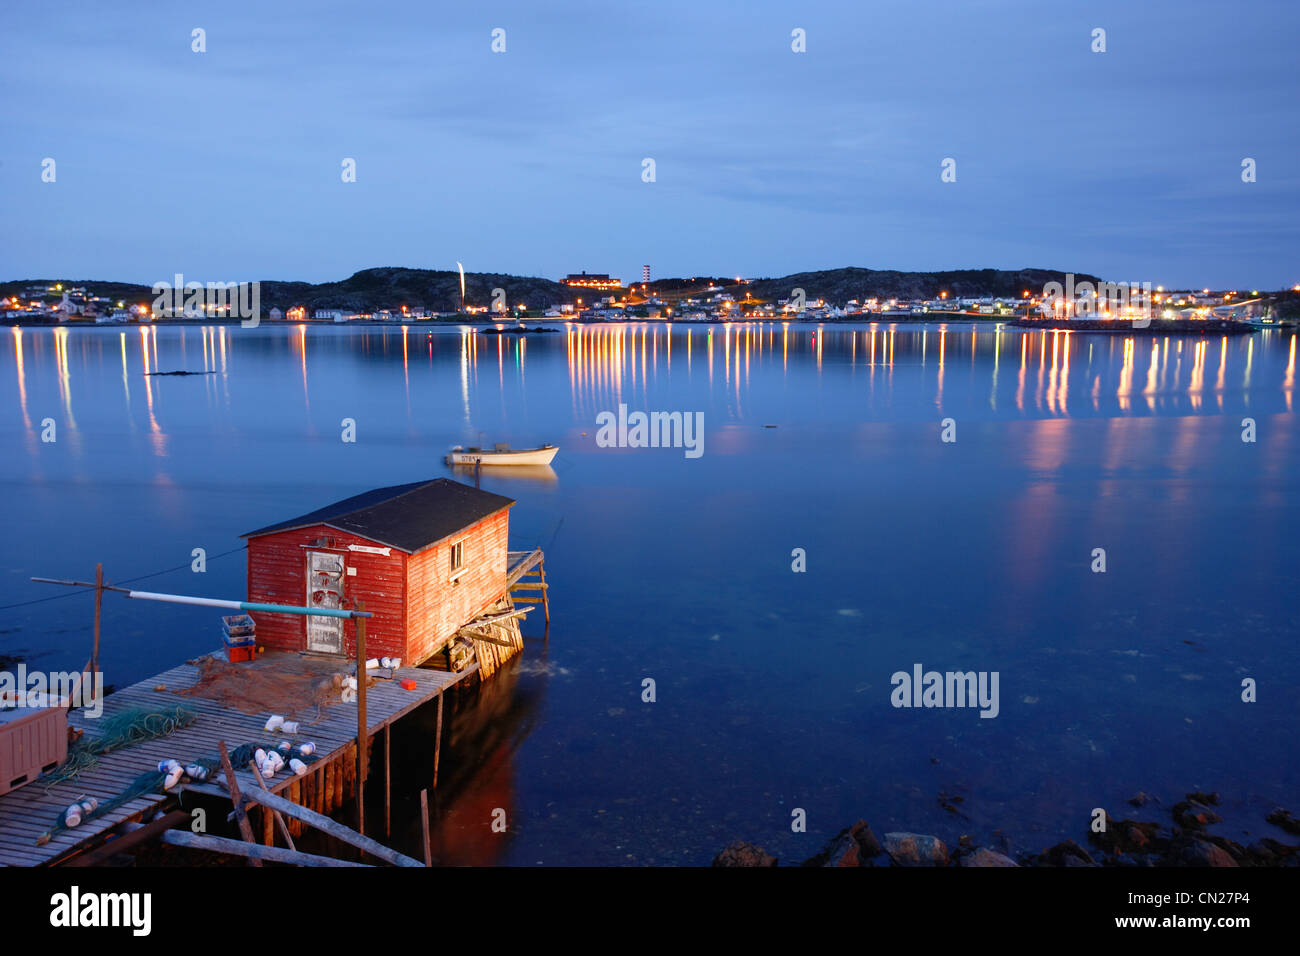 View of Village and Harbour at Twilight, Twillingate (North Island),   Newfoundland Stock Photo